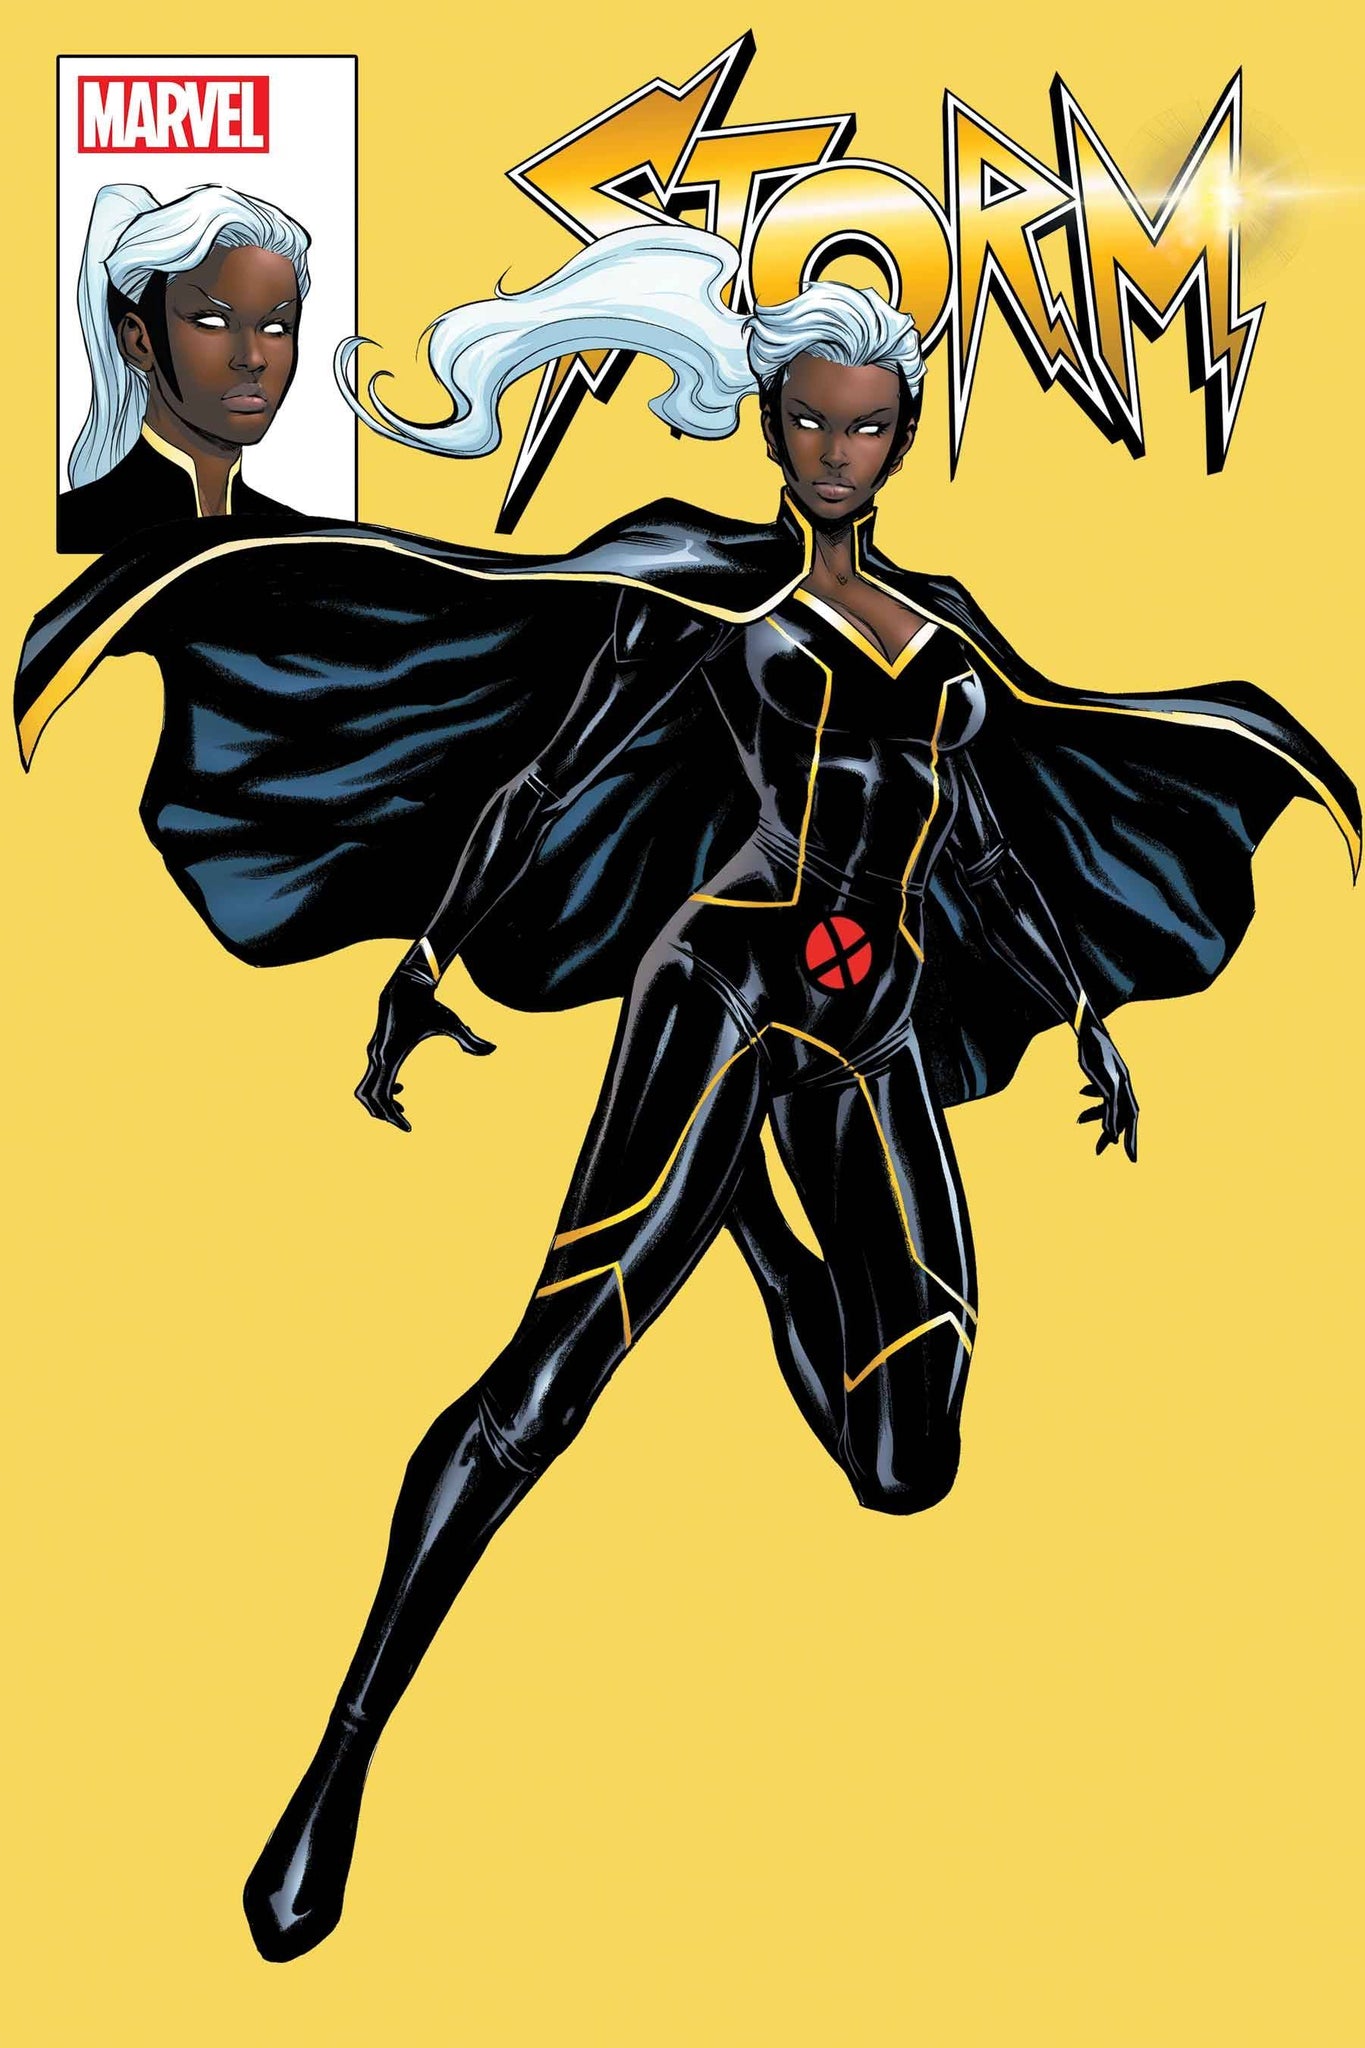 STORM #1 (OF 5)